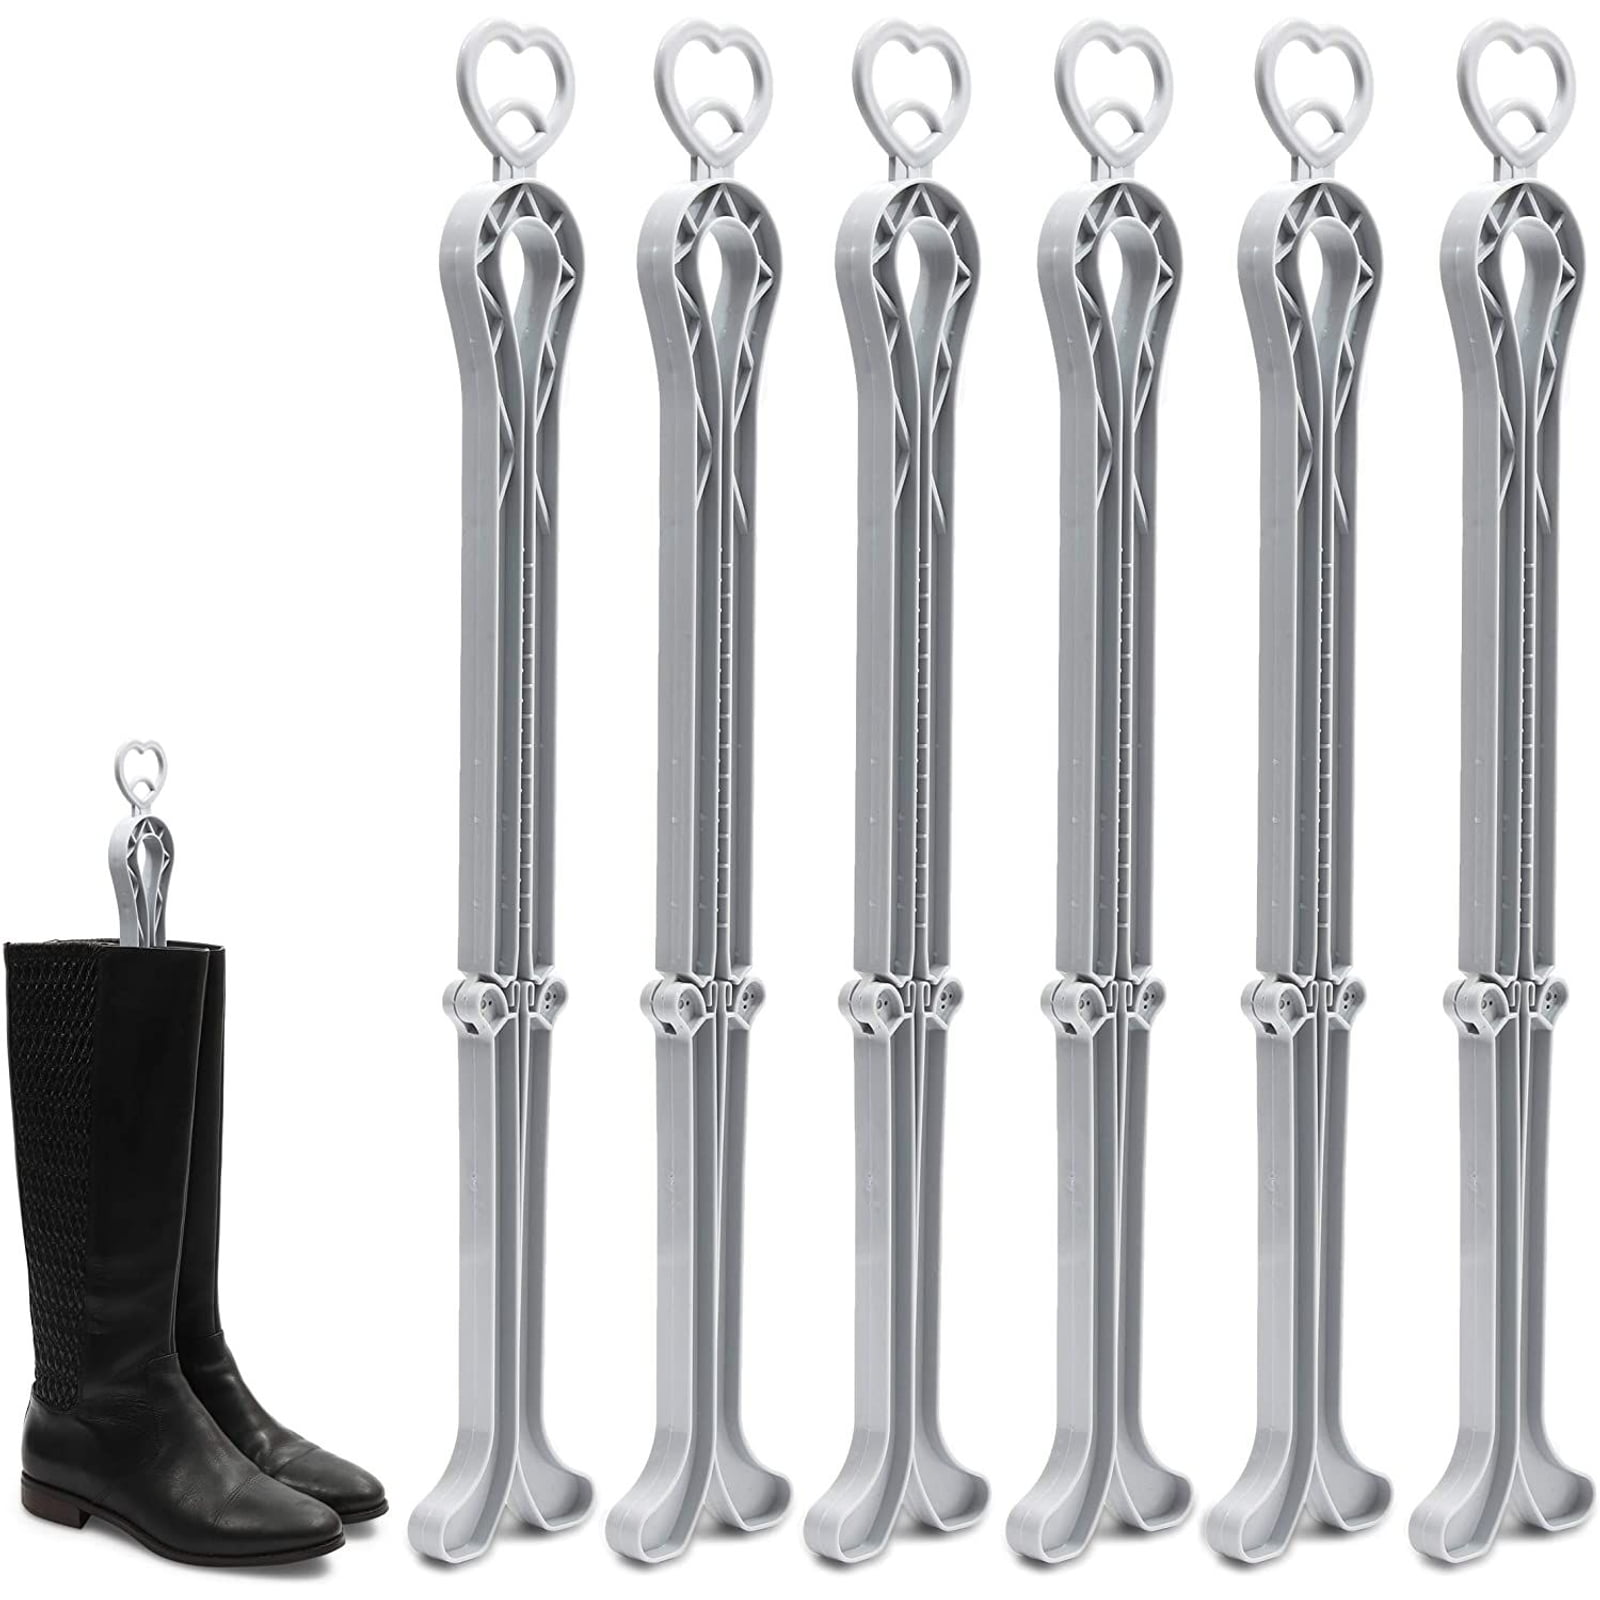 2Pairs Shoe Trees Tall Short Boot Shaper Tree Inserts Knee High Shoes Thigh Boot Holder Support for Women Lady Most Shoes Boot Support 